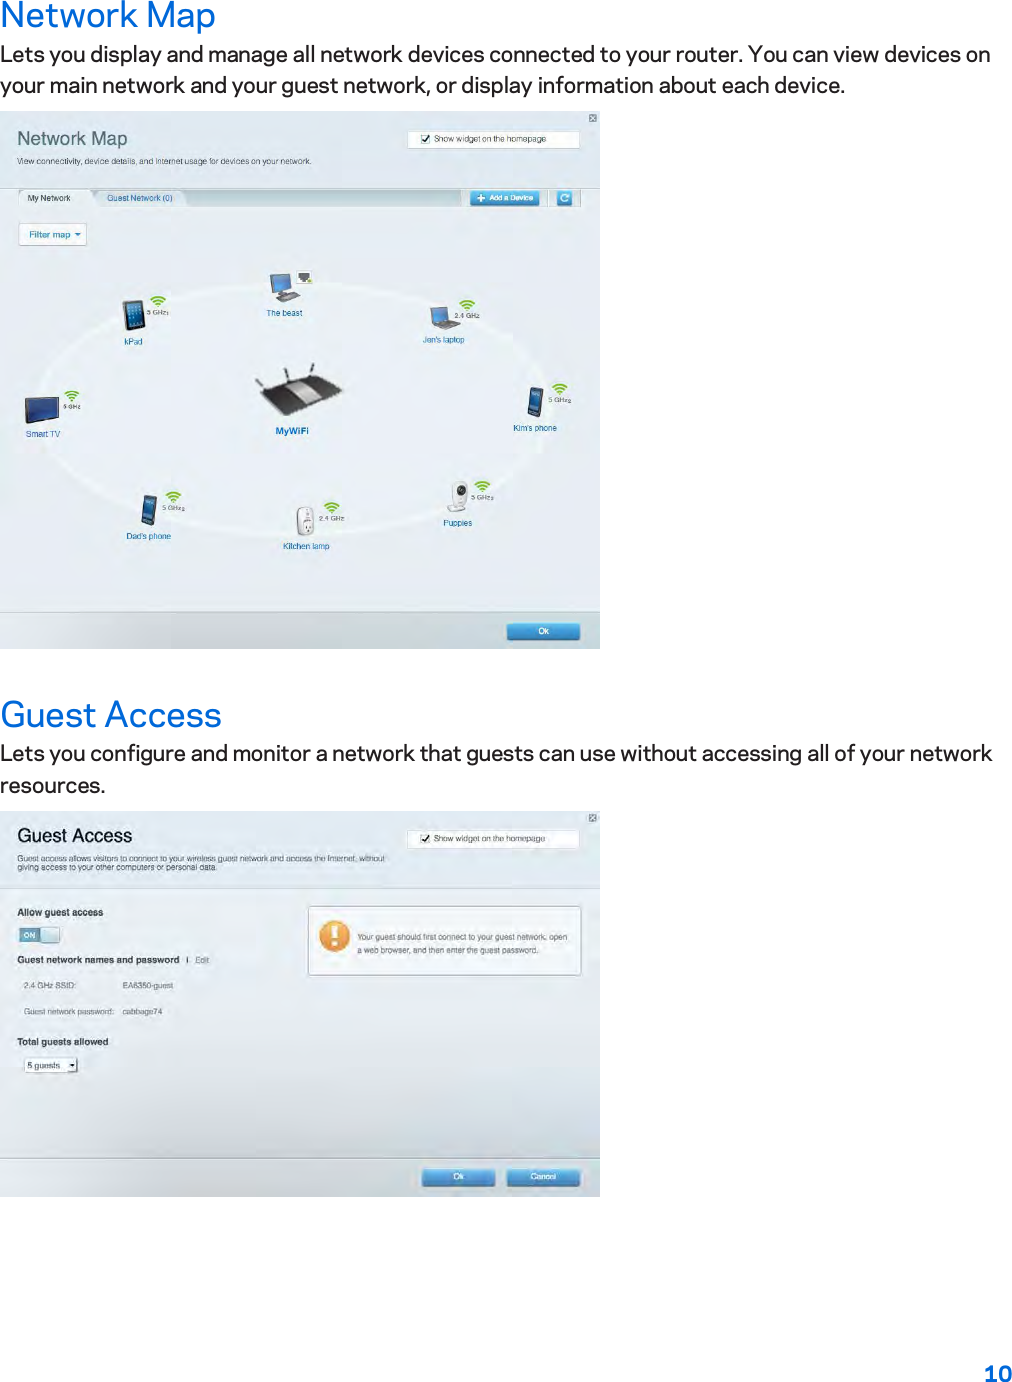 10  Network Map Lets you display and manage all network devices connected to your router. You can view devices on your main network and your guest network, or display information about each device.  Guest Access Lets you configure and monitor a network that guests can use without accessing all of your network resources.  